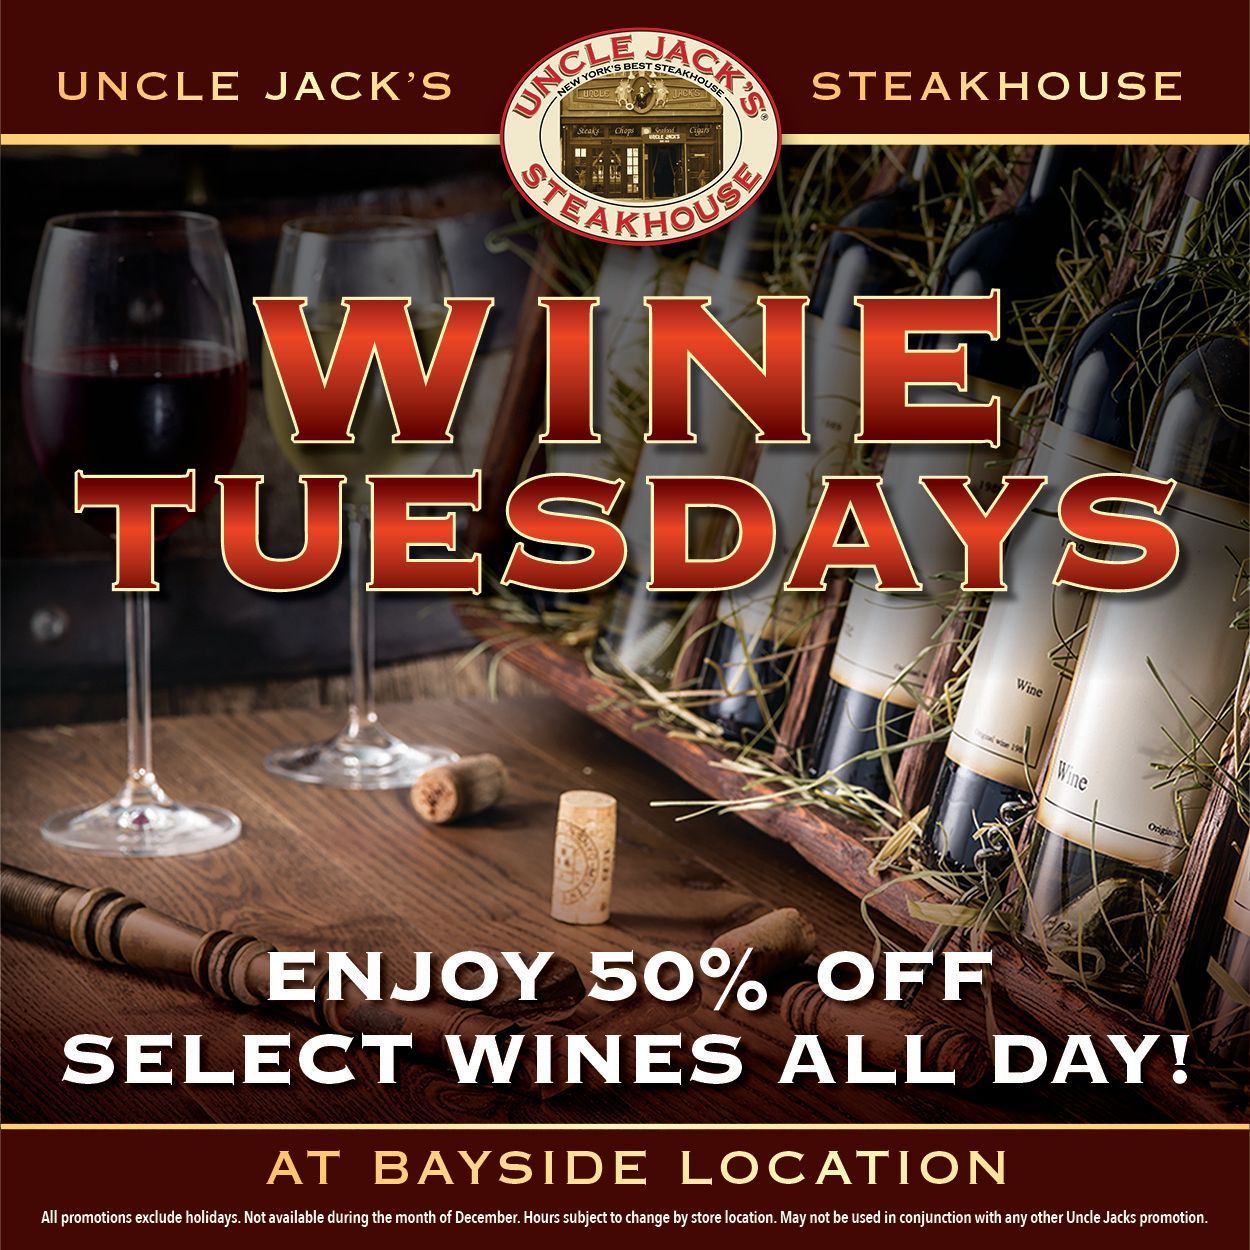 an advertisement for uncle jack 's steakhouse advertising wine tuesdays